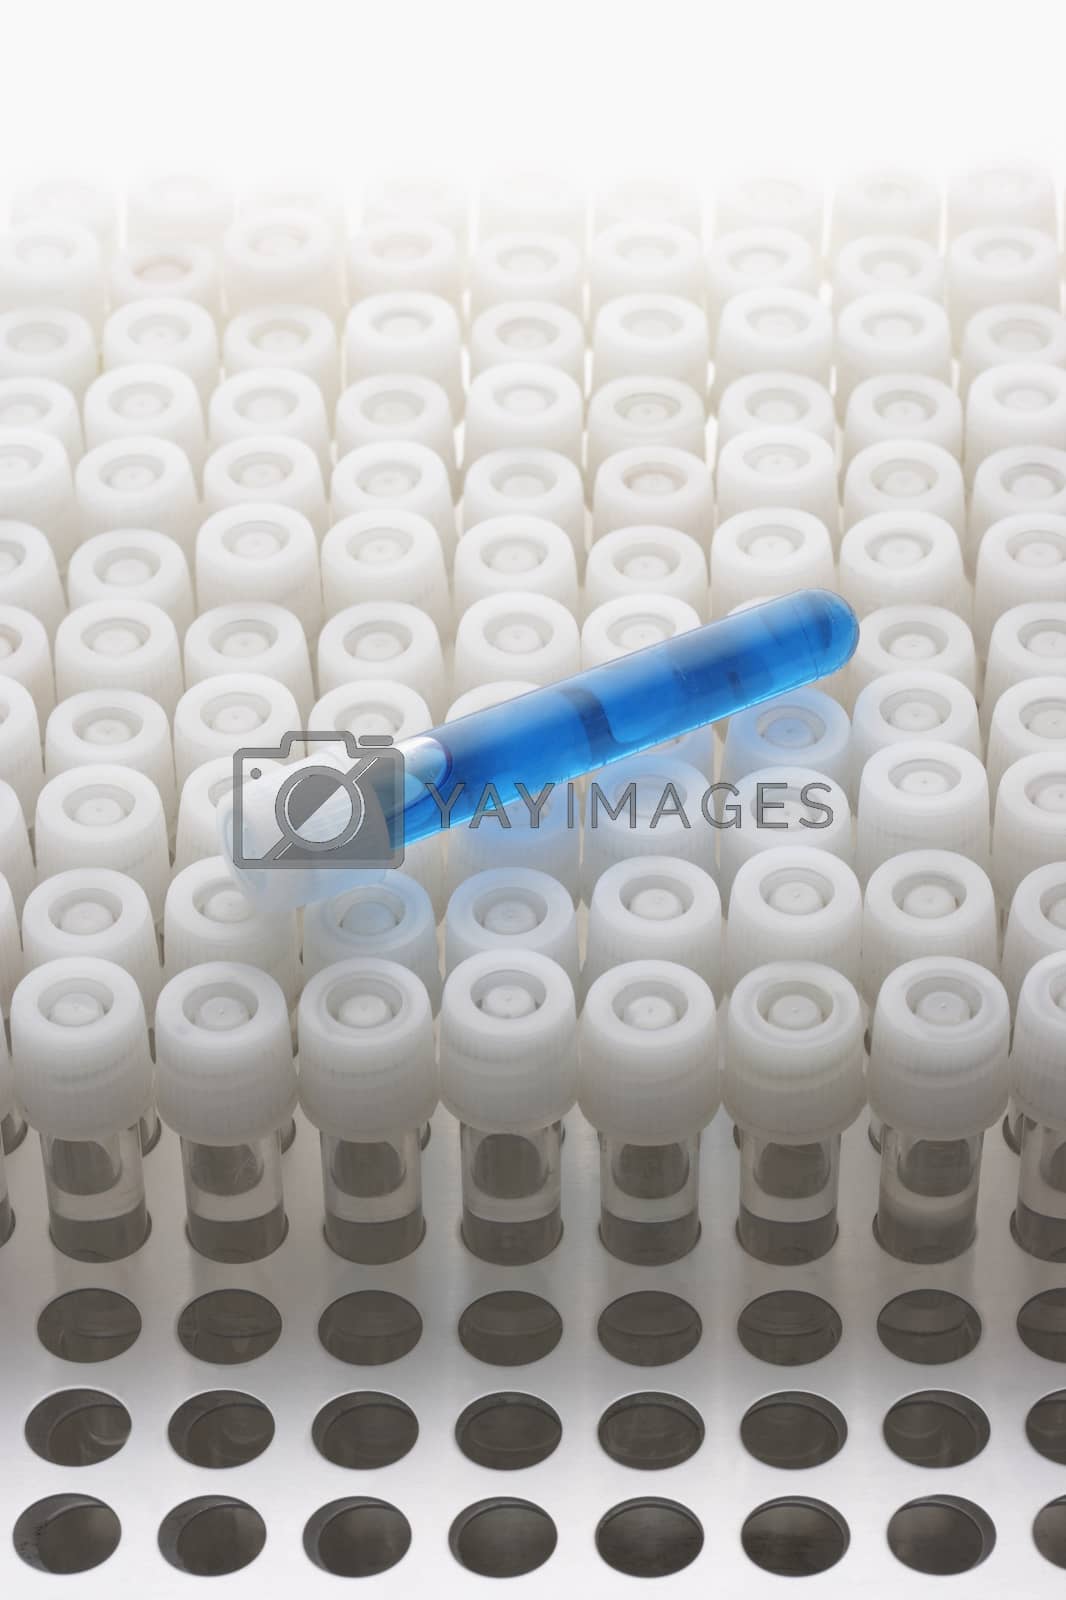 Royalty free image of Blue test tube lying on empty test tubes by moodboard